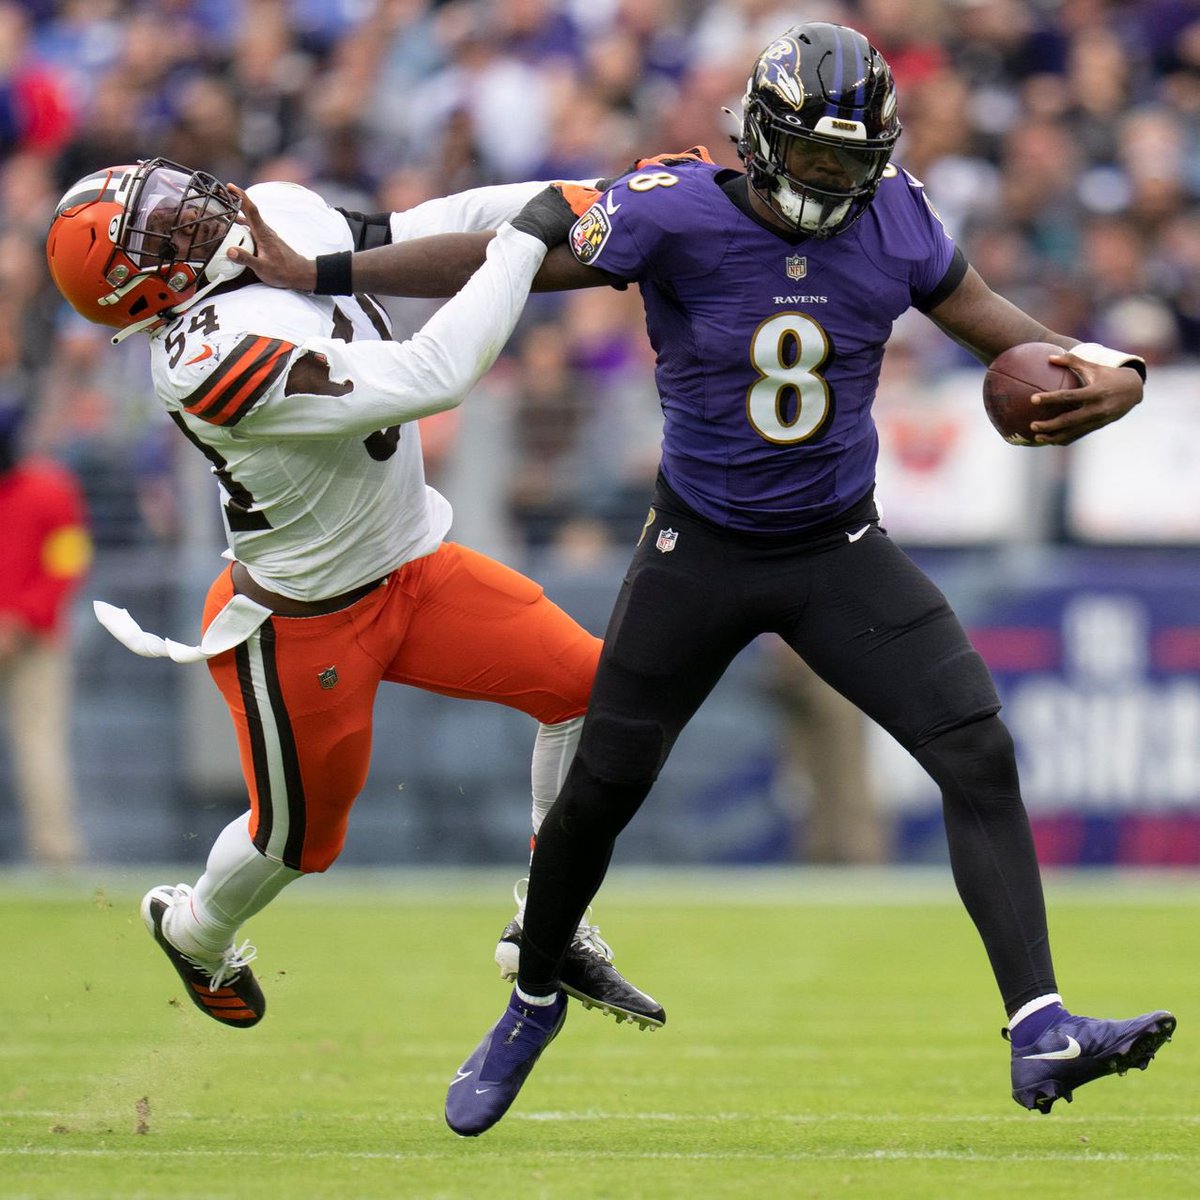 WOW… 27-year-old #Ravens QB Lamar Jackson could already be a HALL of FAMER:

• 2x MVP
• 2x First Team All-Pro
• 3x Pro Bowler 
• 62 & 24
• NFL passing touchdowns leader (2019)
• Bert Bell Award (2019)
• Single-season rushing yards by a QB: 1,206 

🤯🤯🤯